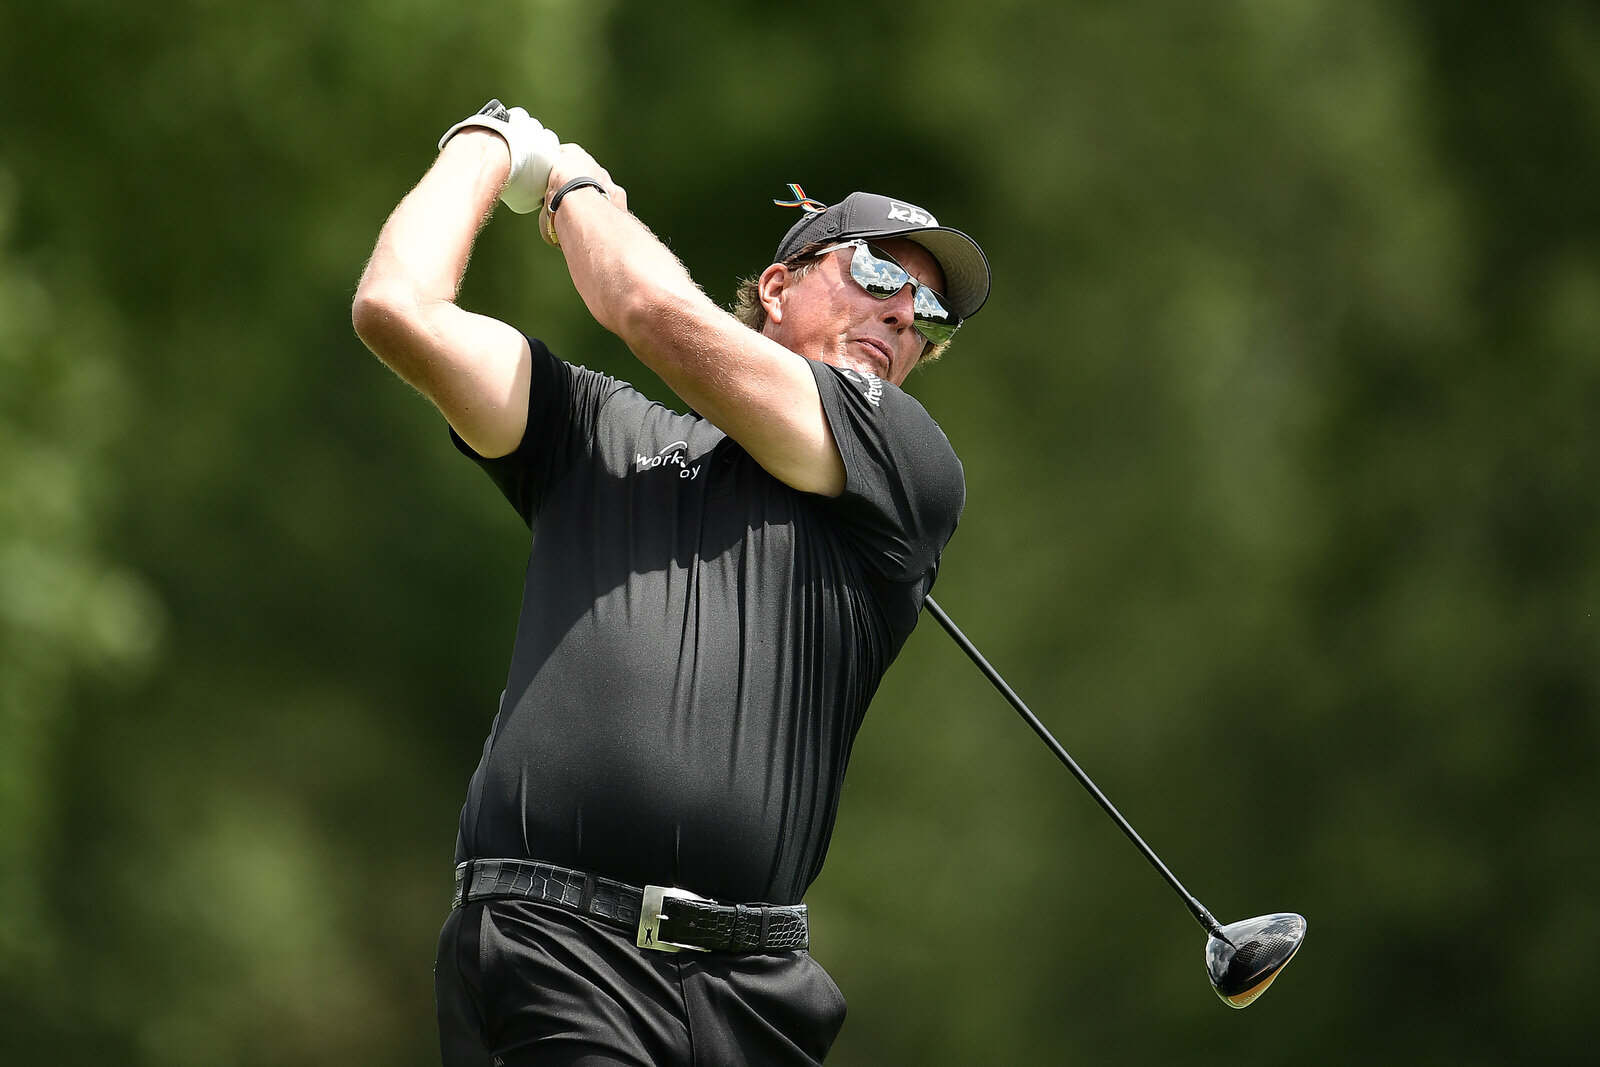  MEMPHIS, TENNESSEE - AUGUST 02:  Phil Mickelson of the United States plays his shot from the second tee during the final round of the World Golf Championship-FedEx St Jude Invitational at TPC Southwind on August 02, 2020 in Memphis, Tennessee. (Phot